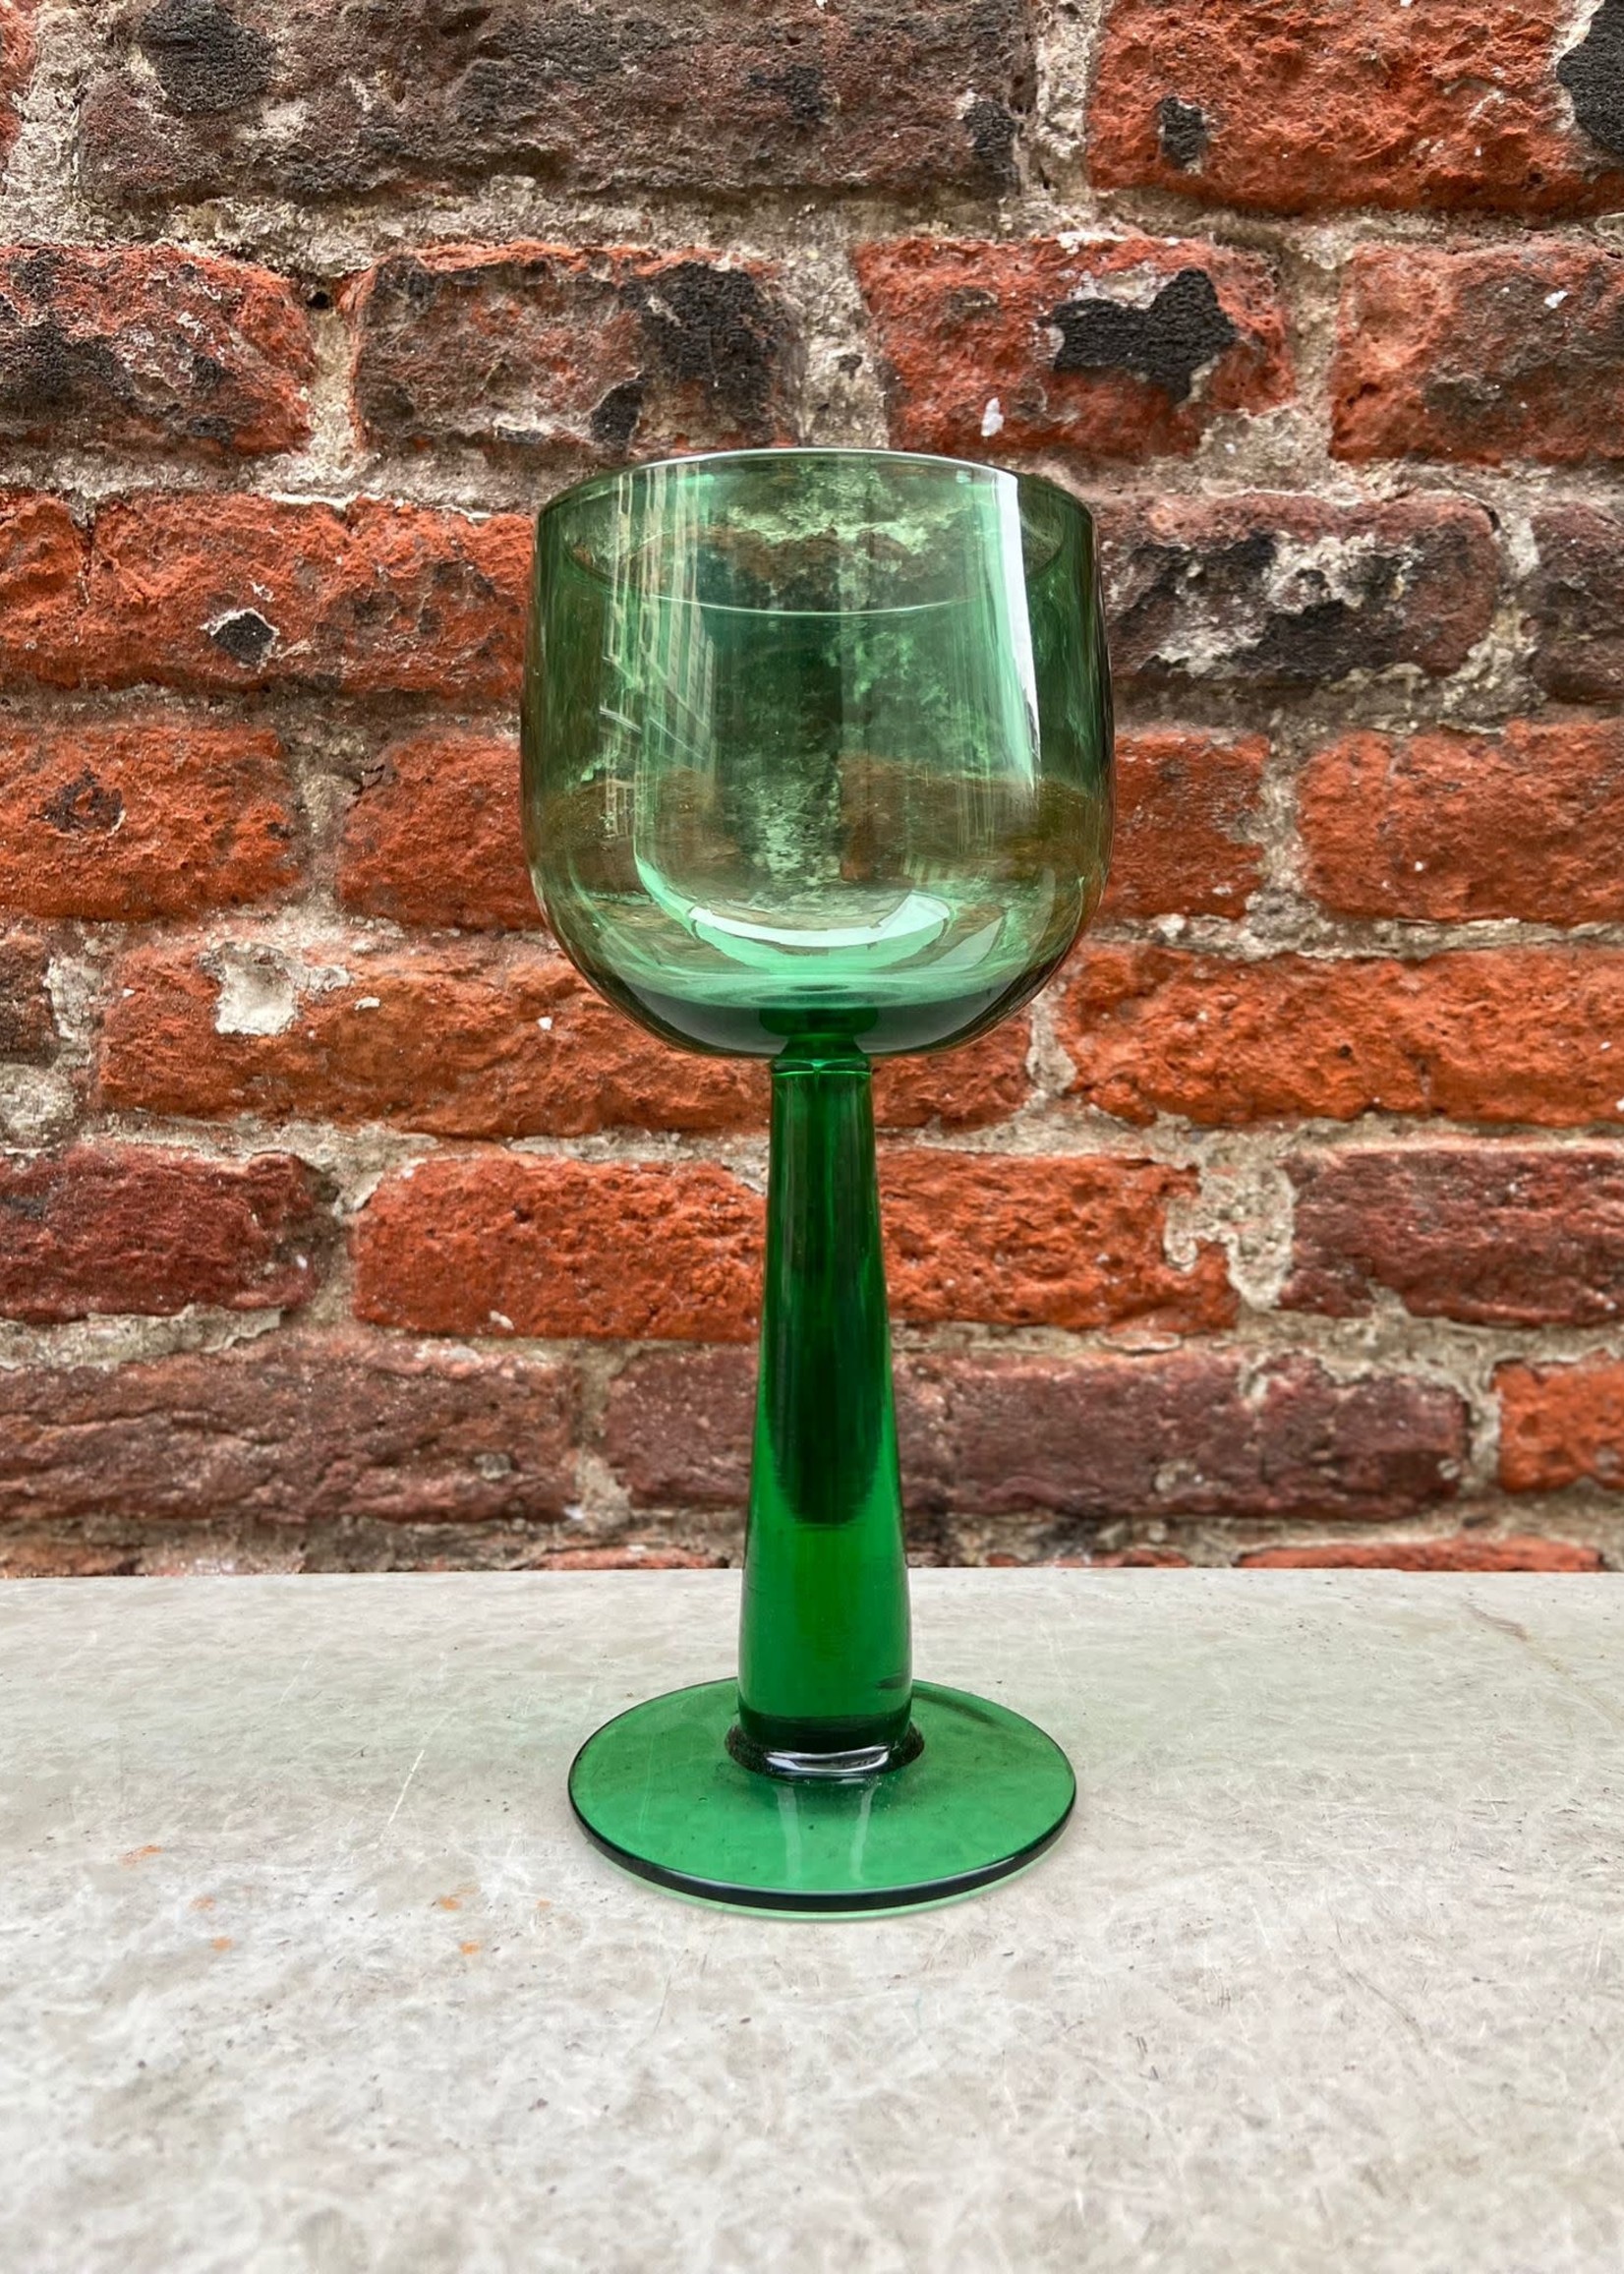 HKliving - Set of 4 Olive Green Tall Wine Glass: The Emeralds